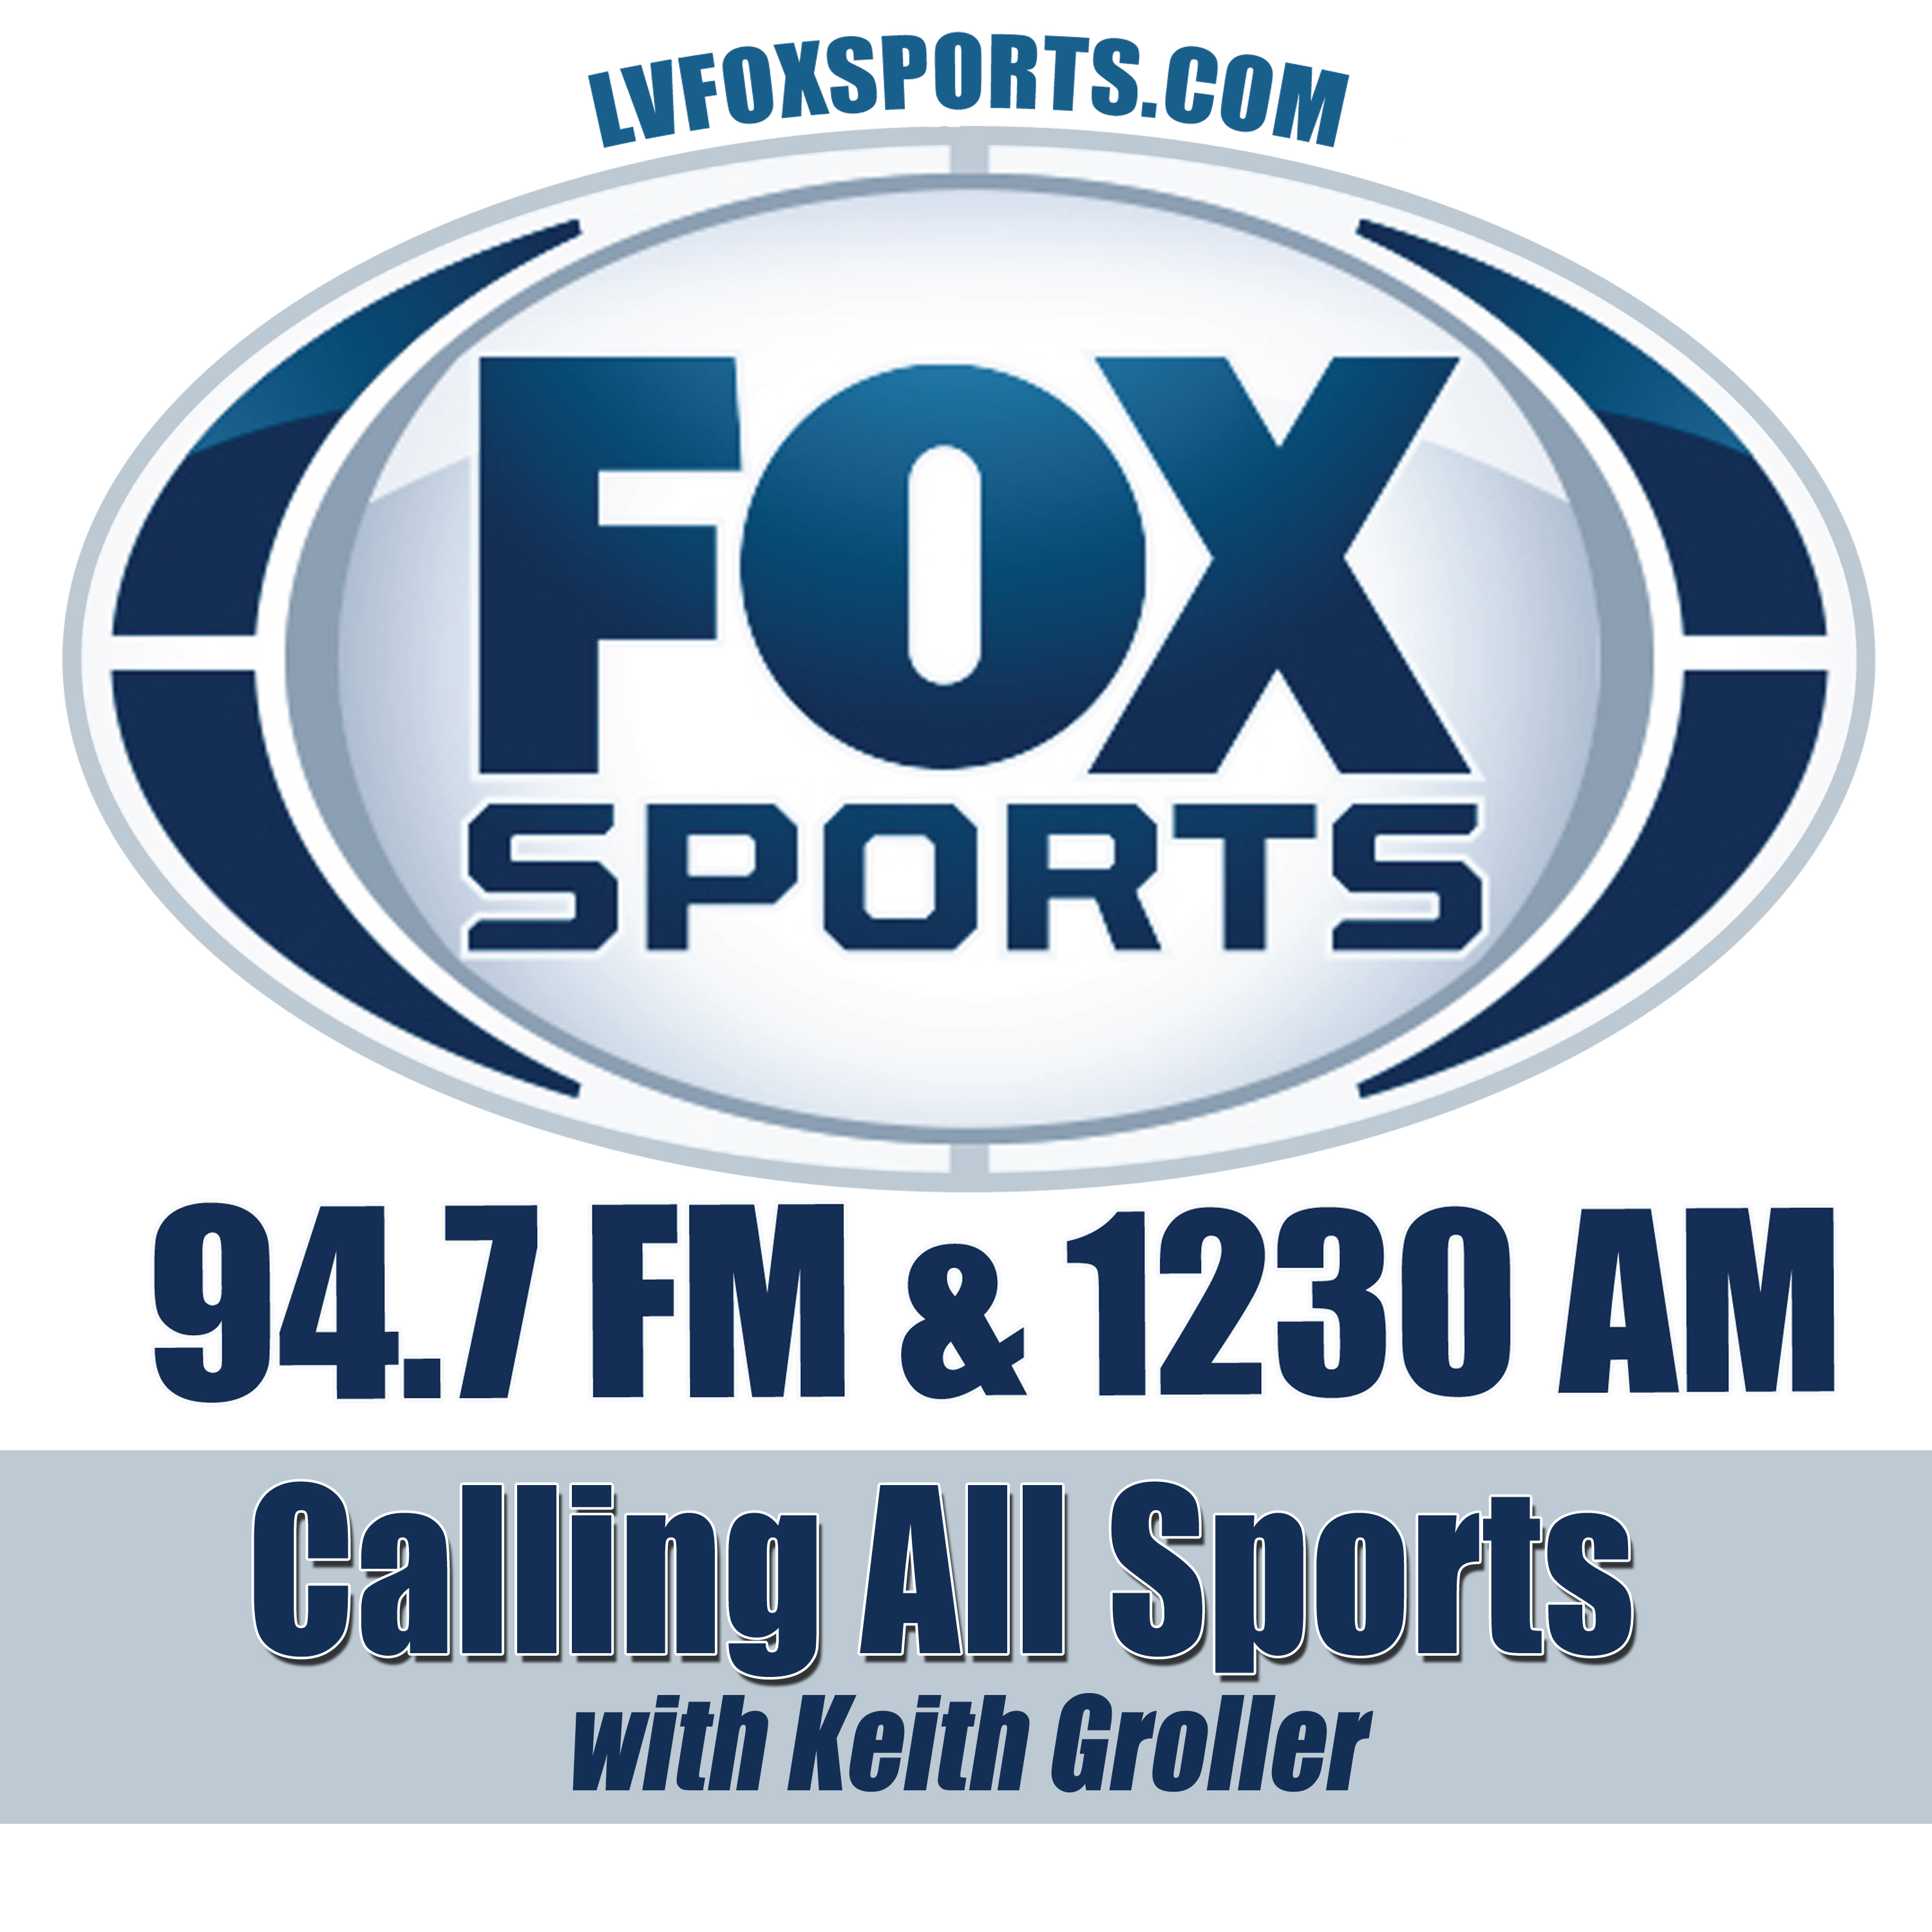 Keith is joined in studio by Delaney Troxell